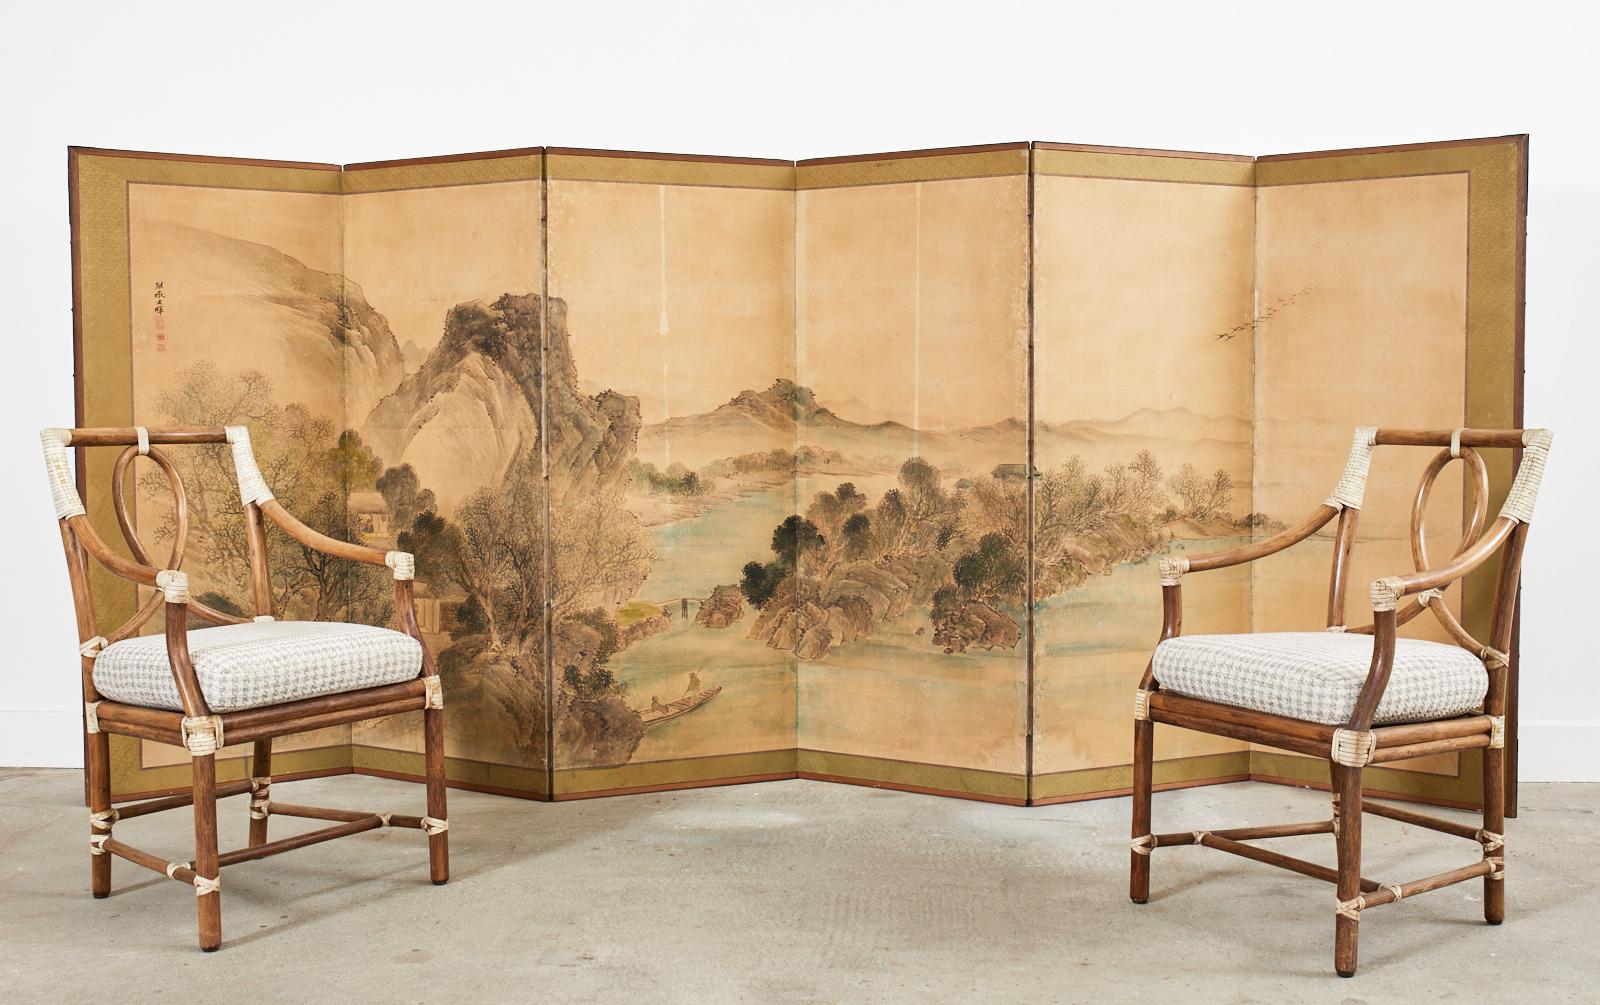 19th century Japanese late Edo period six-panel landscape screen painted in the Nanga/Literati school style by artist Oka Yugaki (Osaka, Japan died 1834). The large painting depicts a water landscape with rustic dwellings in the manner of Yosa